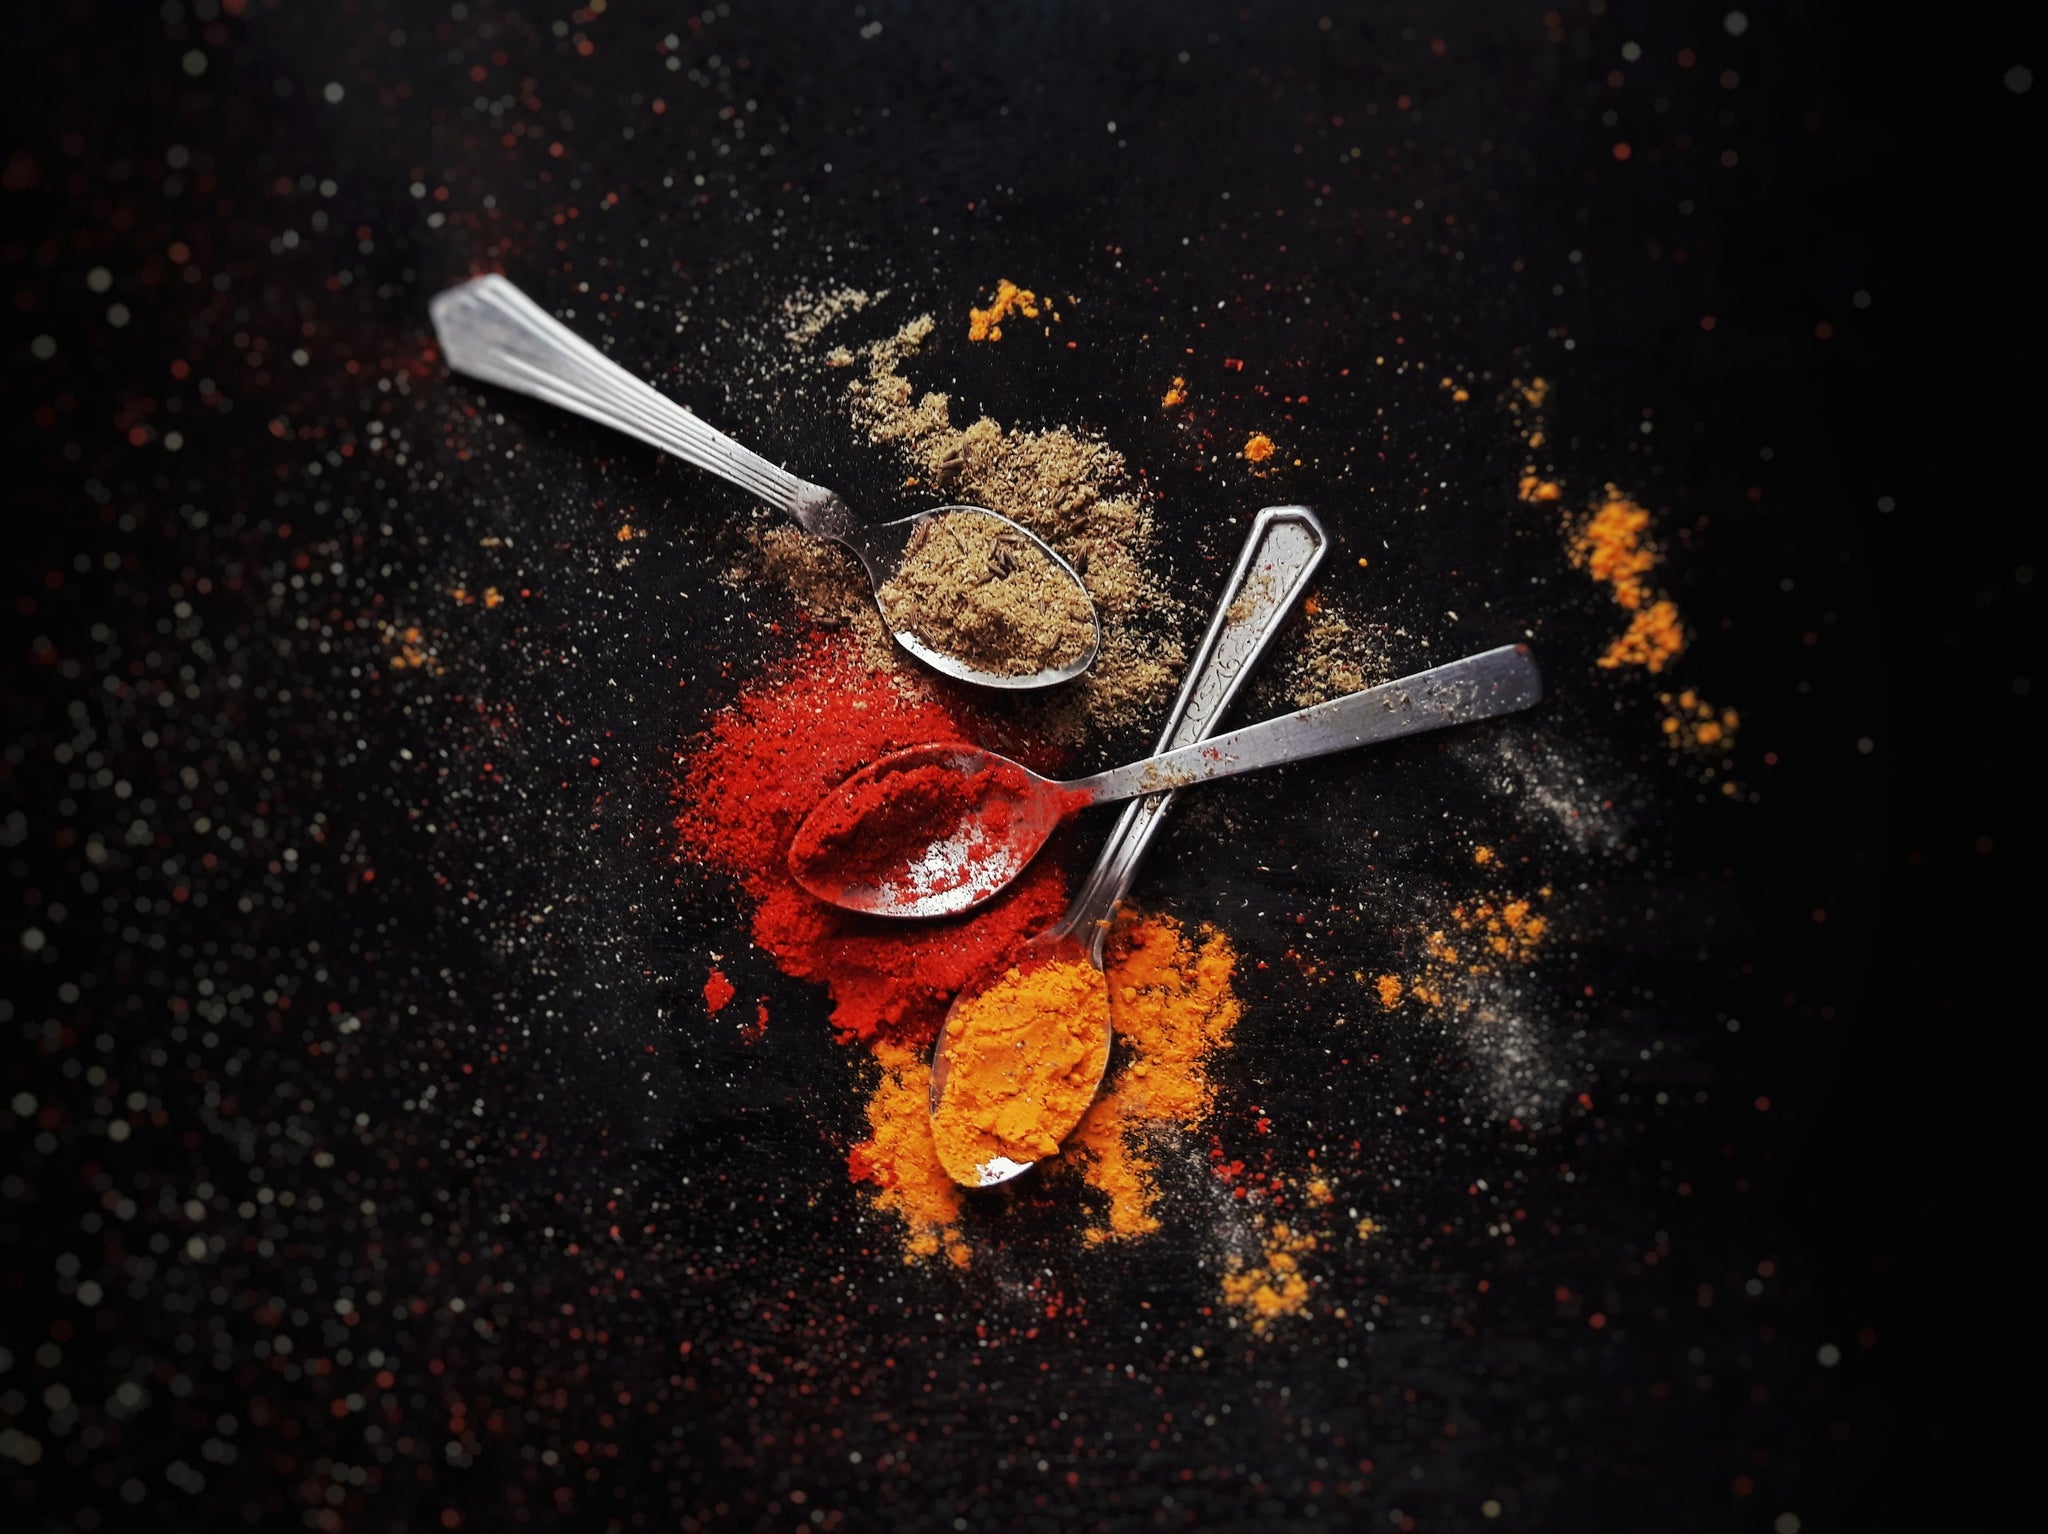 Spoons holding various colorful spices on a black background.